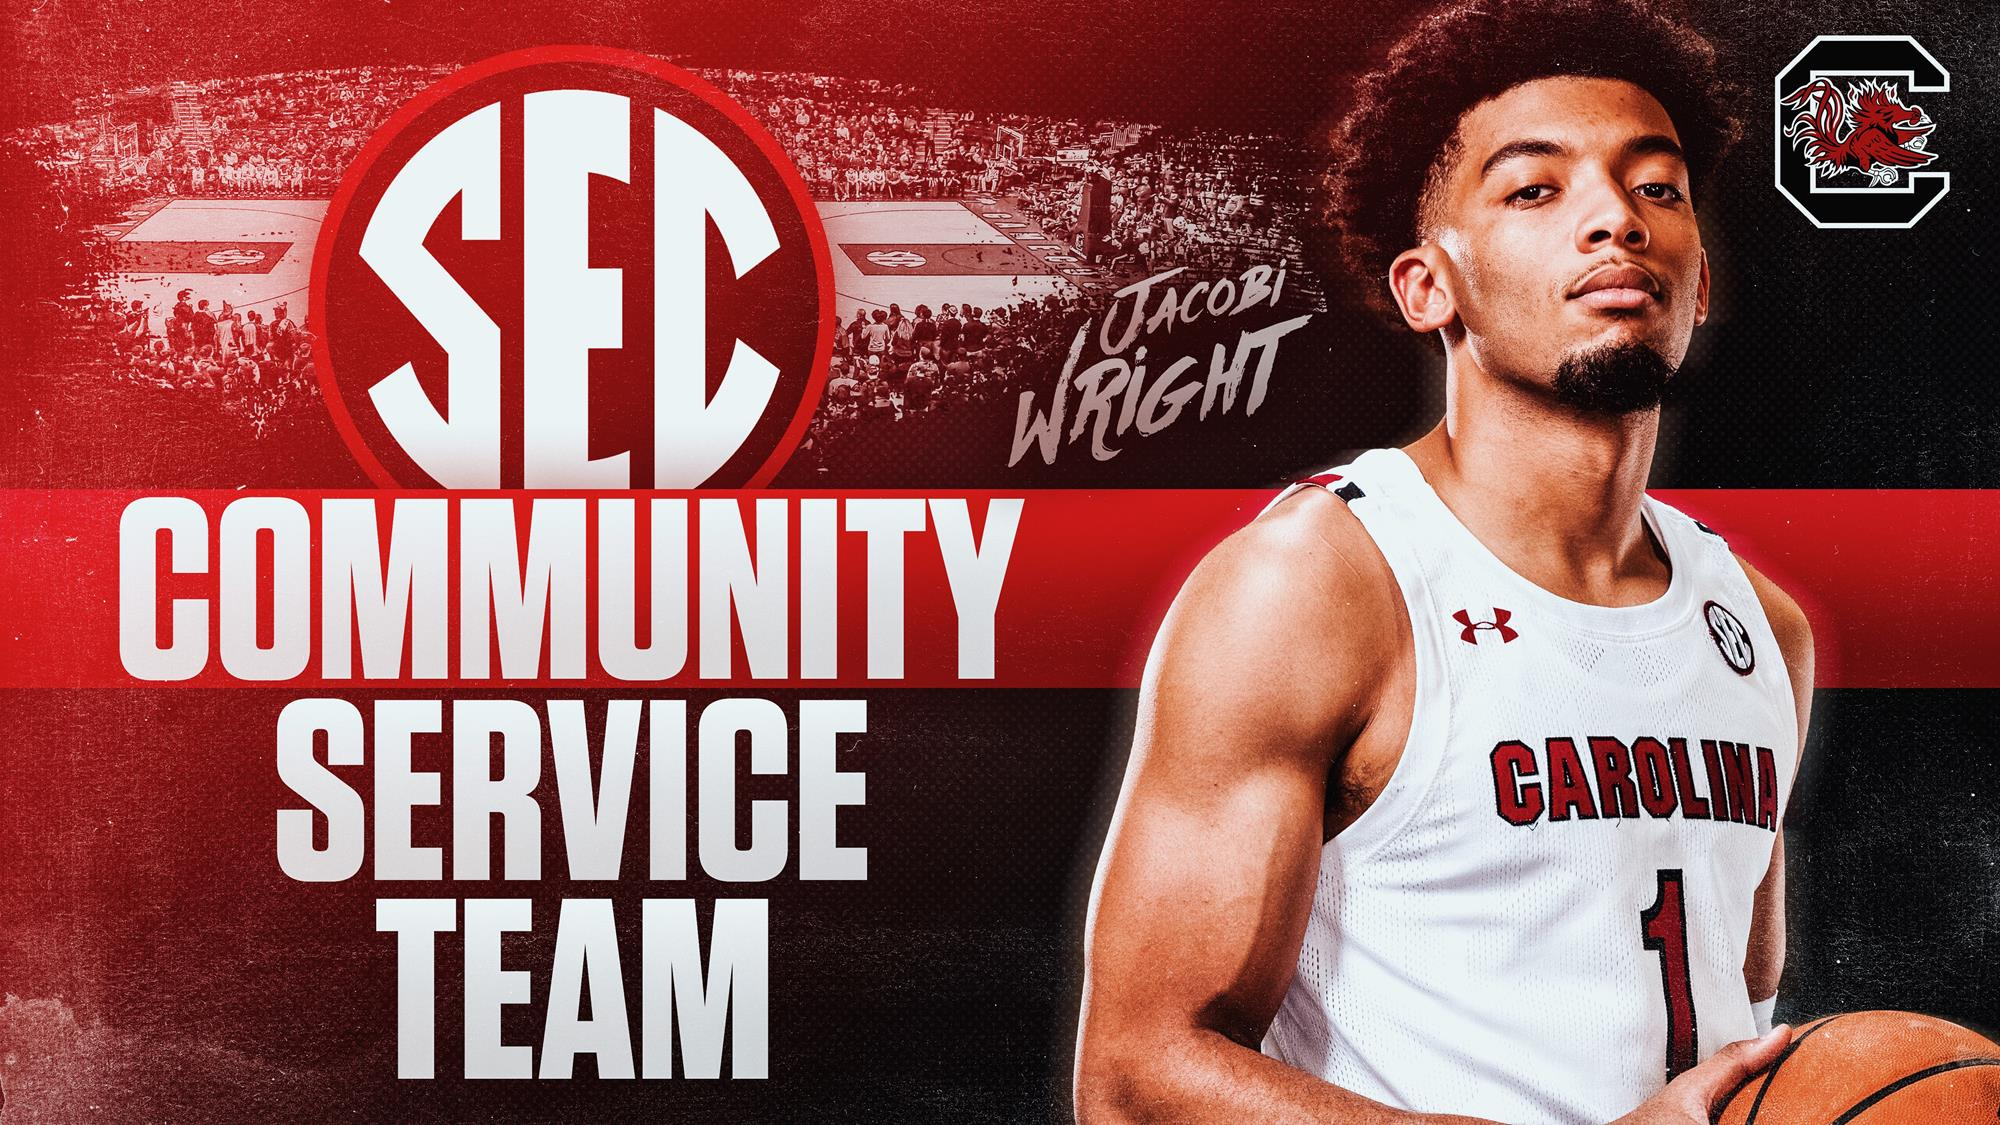 Wright Named to SEC Community Service Team